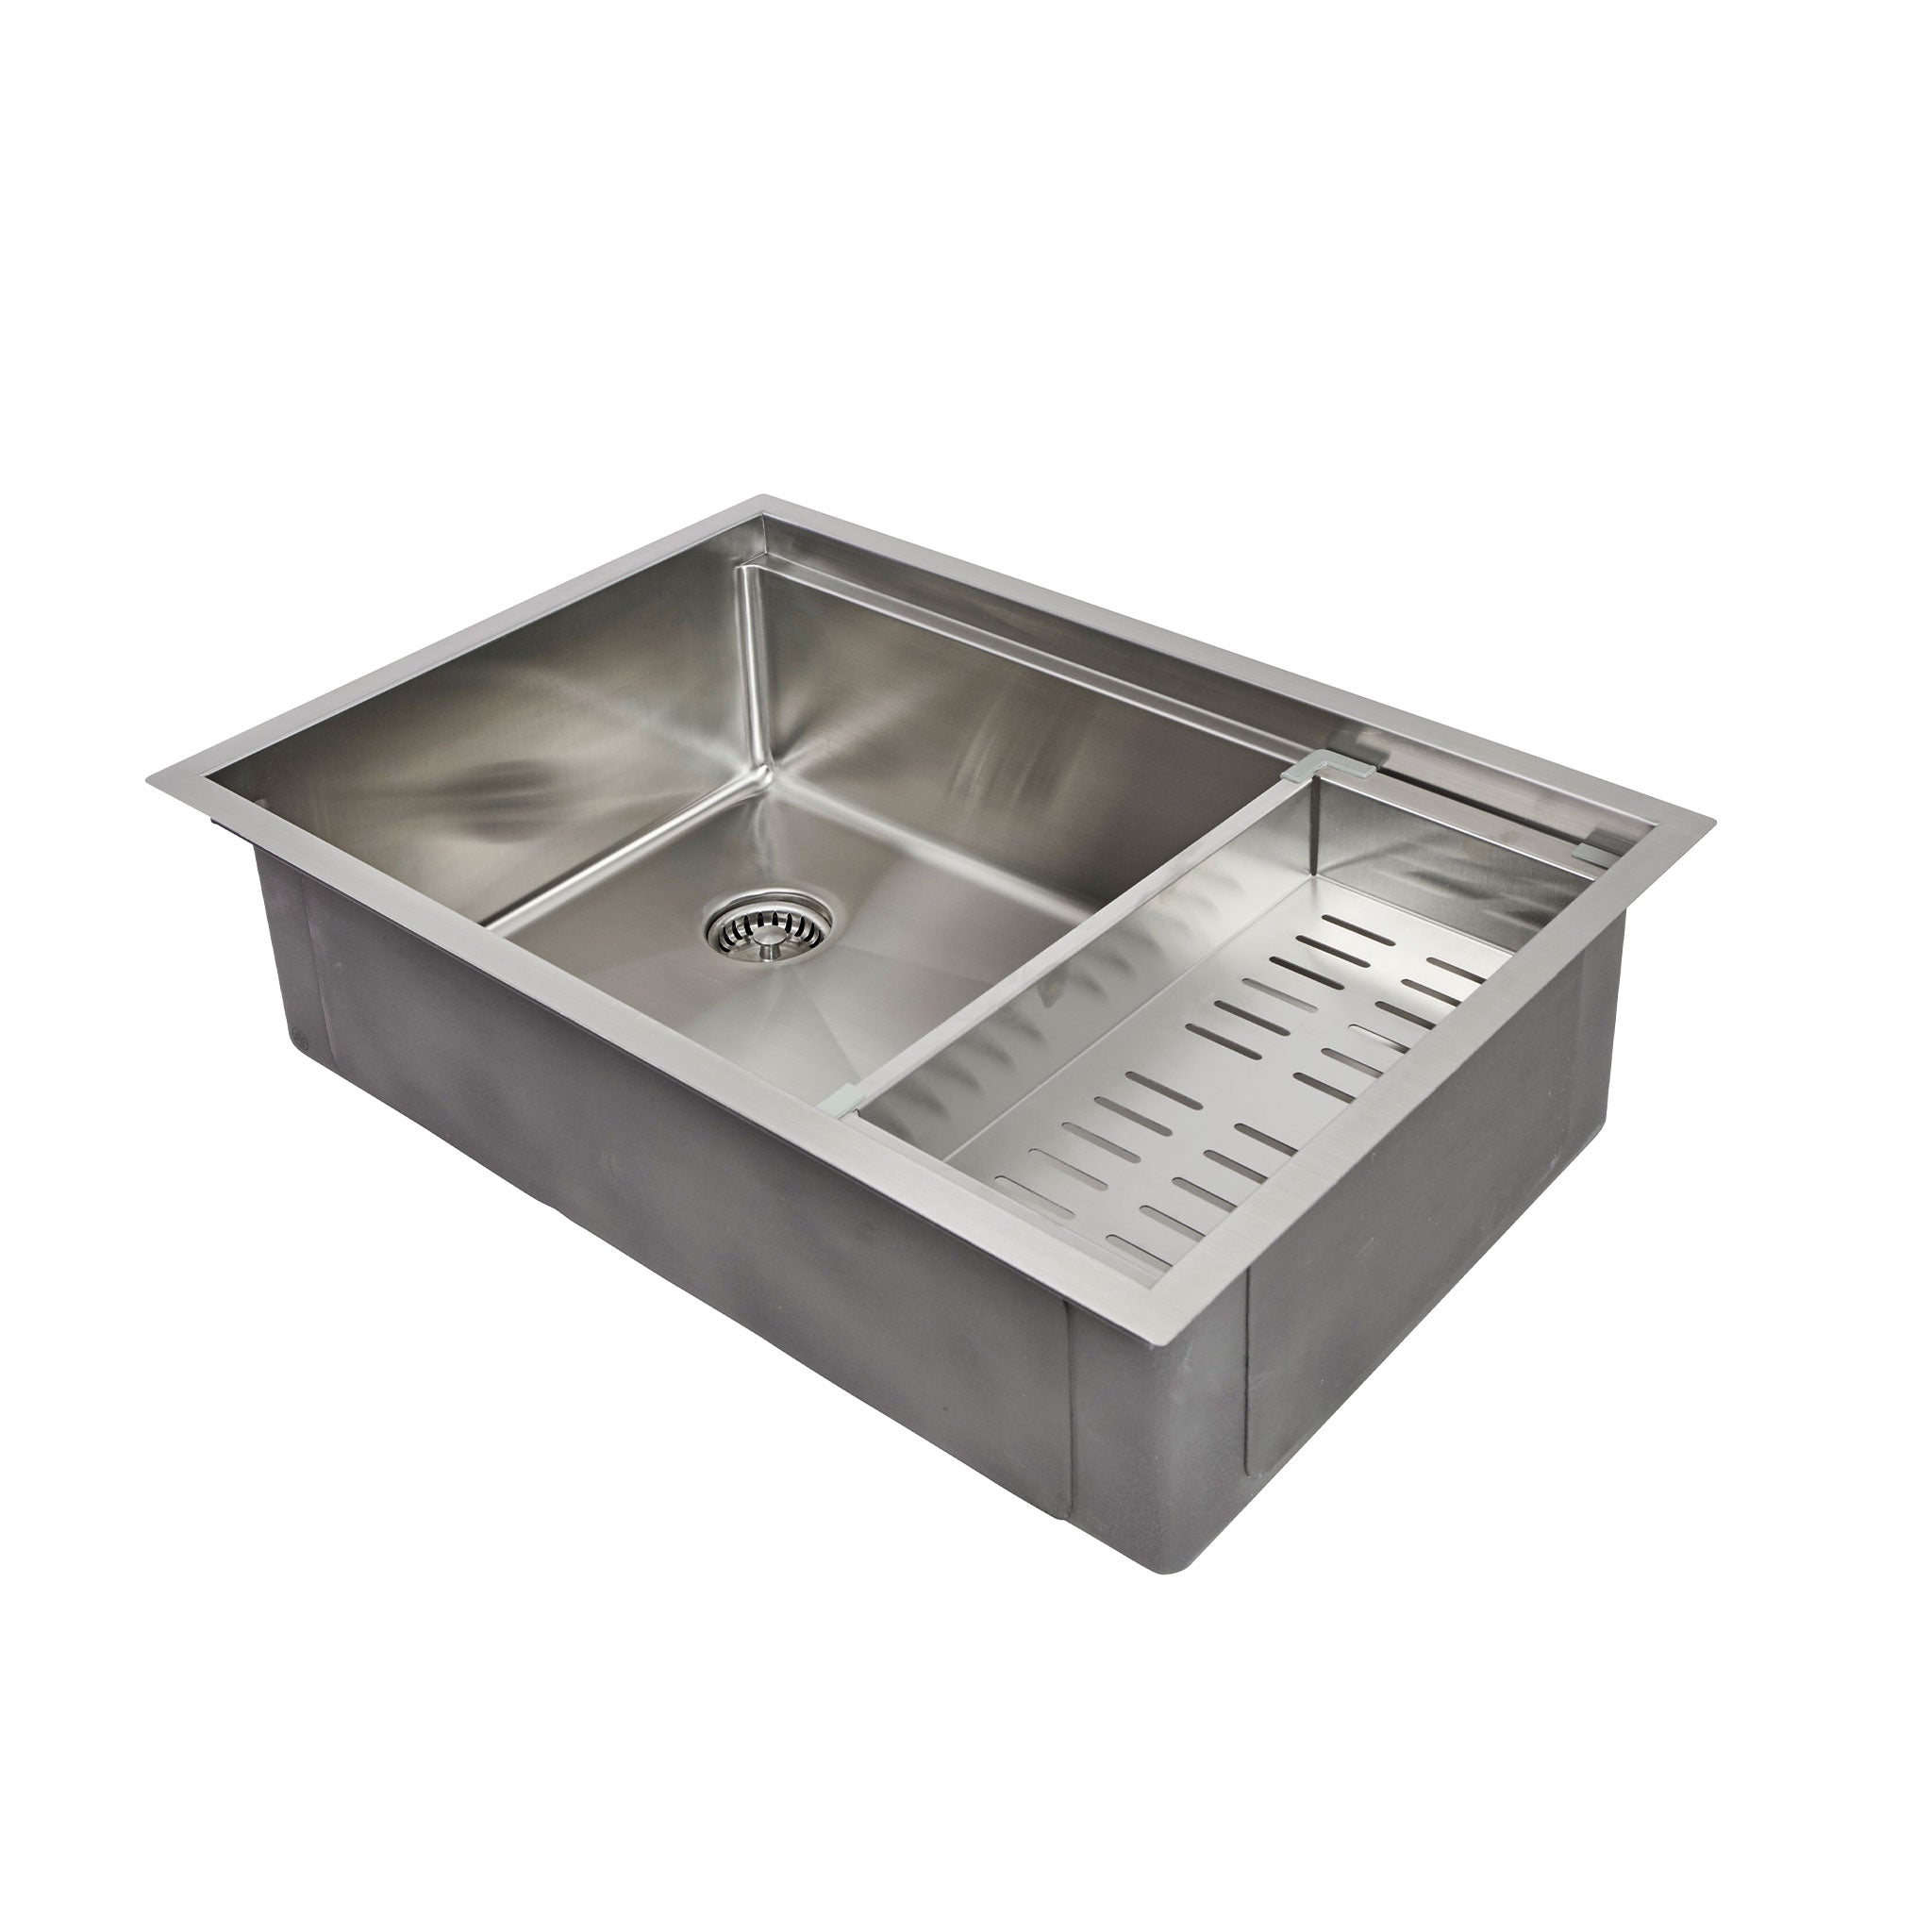 28 inch, workstation sink with offset drain to the left and a stainless colander.